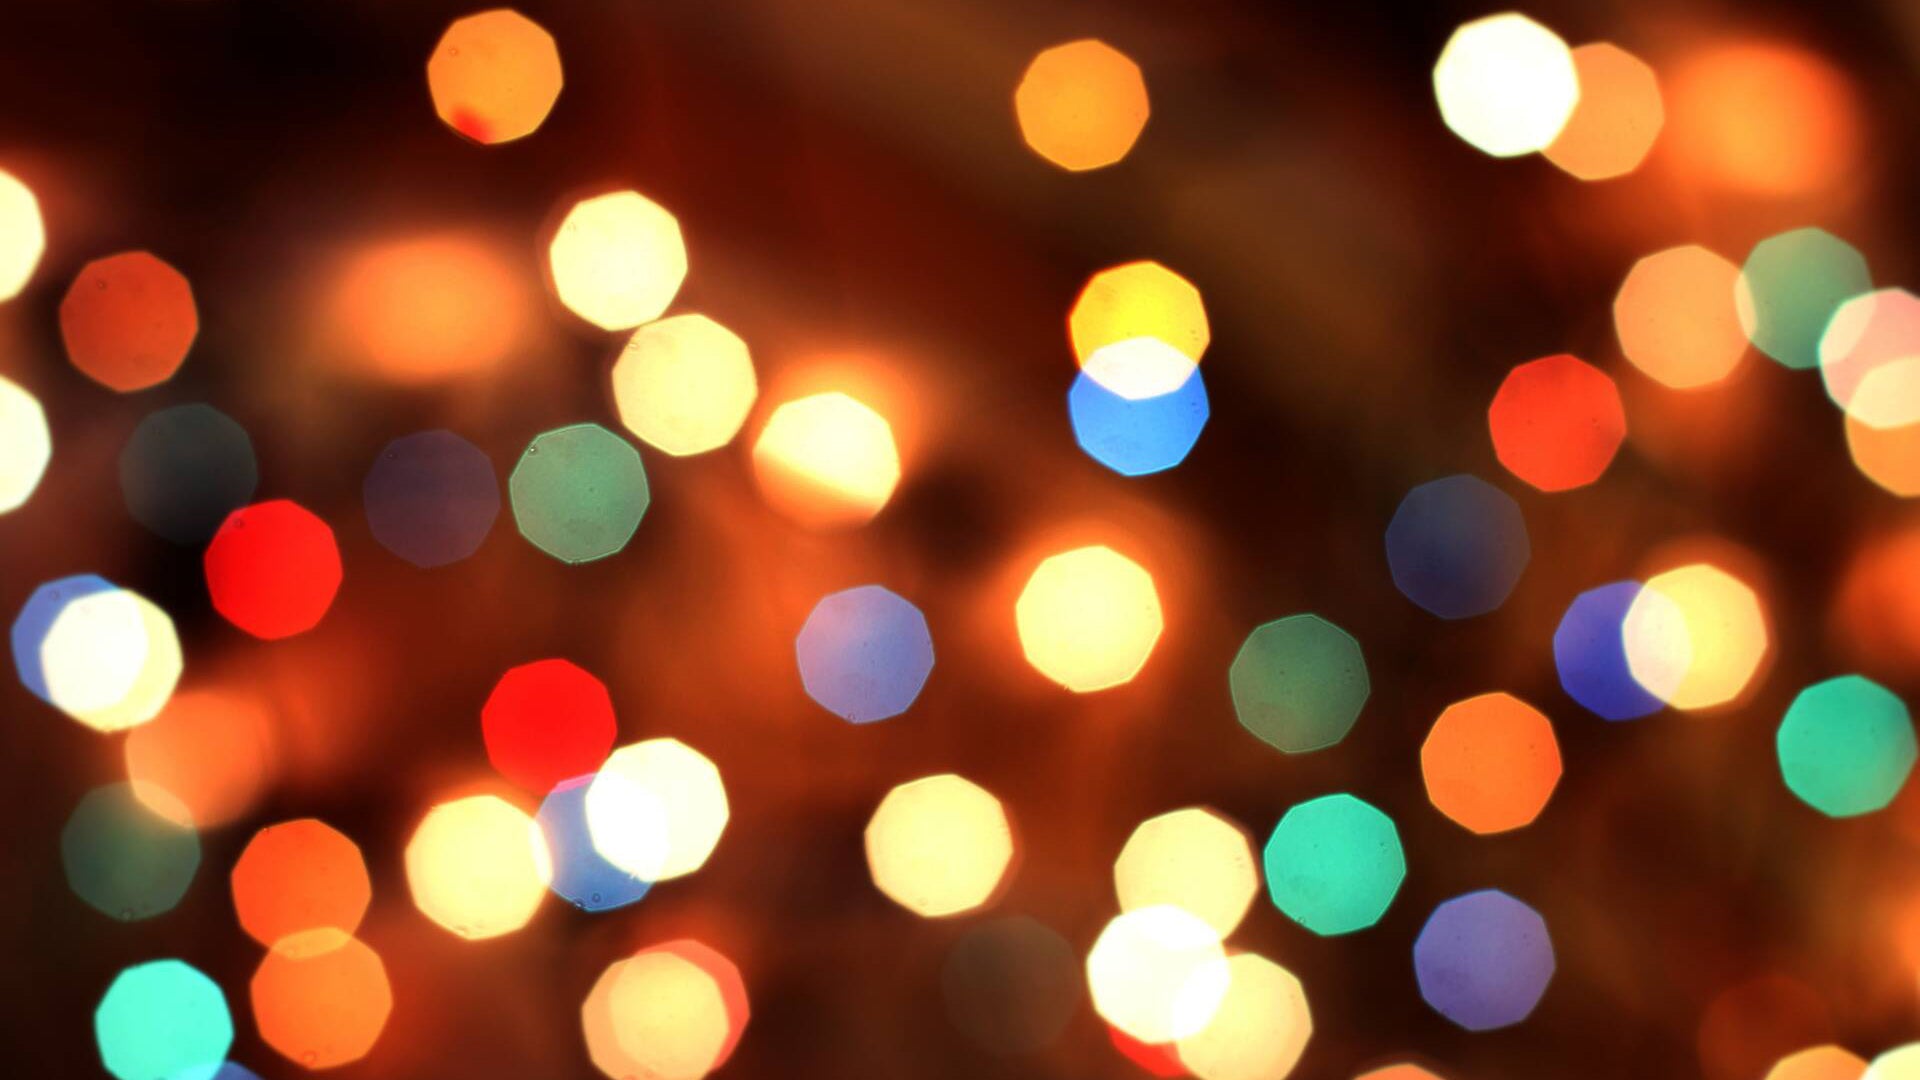 Photographing With Gearing - Bokeh